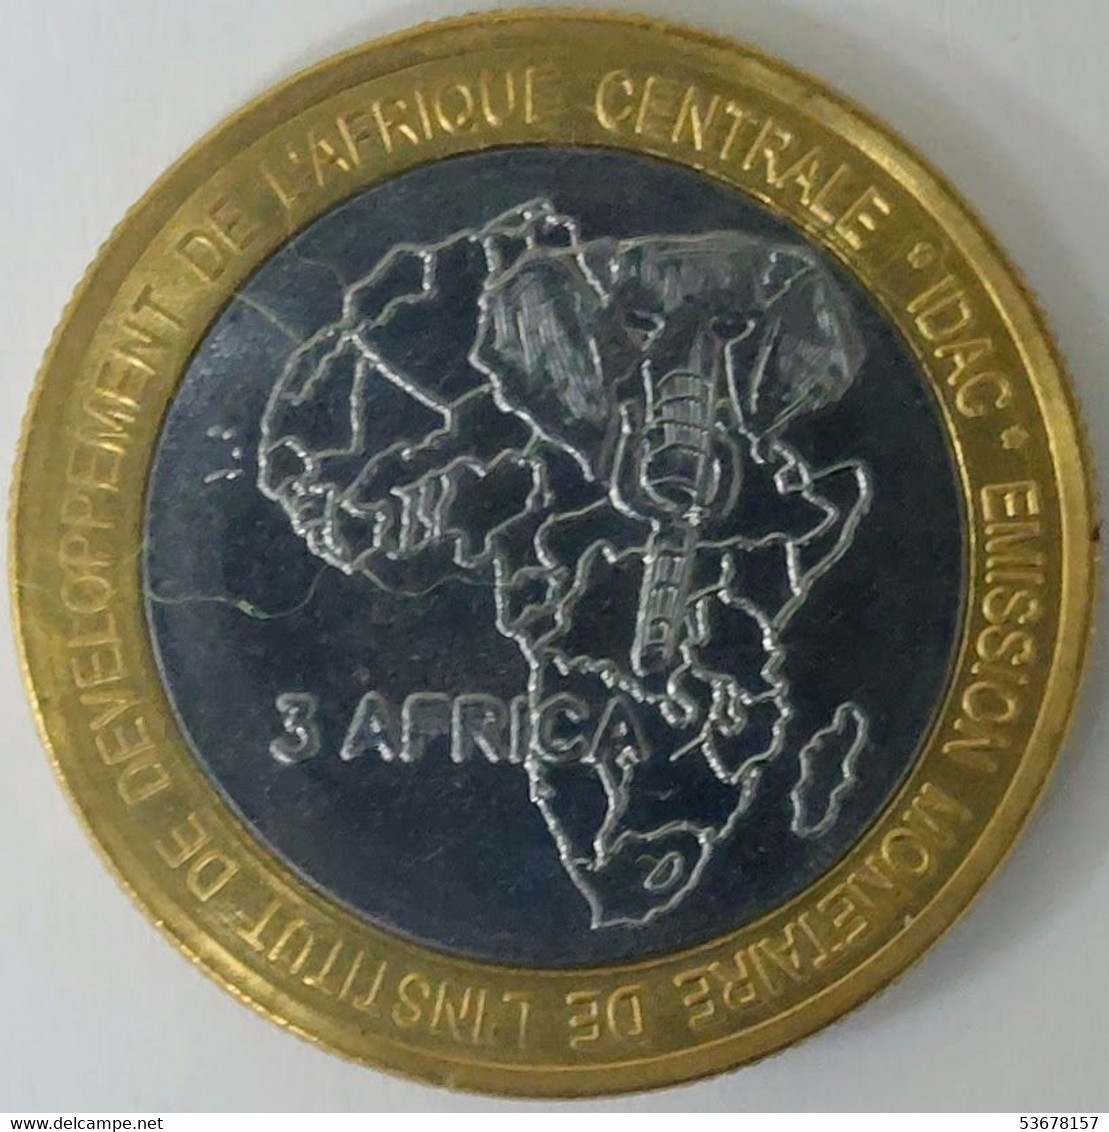 Central African Republic - 4500 CFA Francs (3 Africa), 2007, Pope John Paul II, X# 13 (Fantasy Coin) (1242) - Centraal-Afrikaanse Republiek